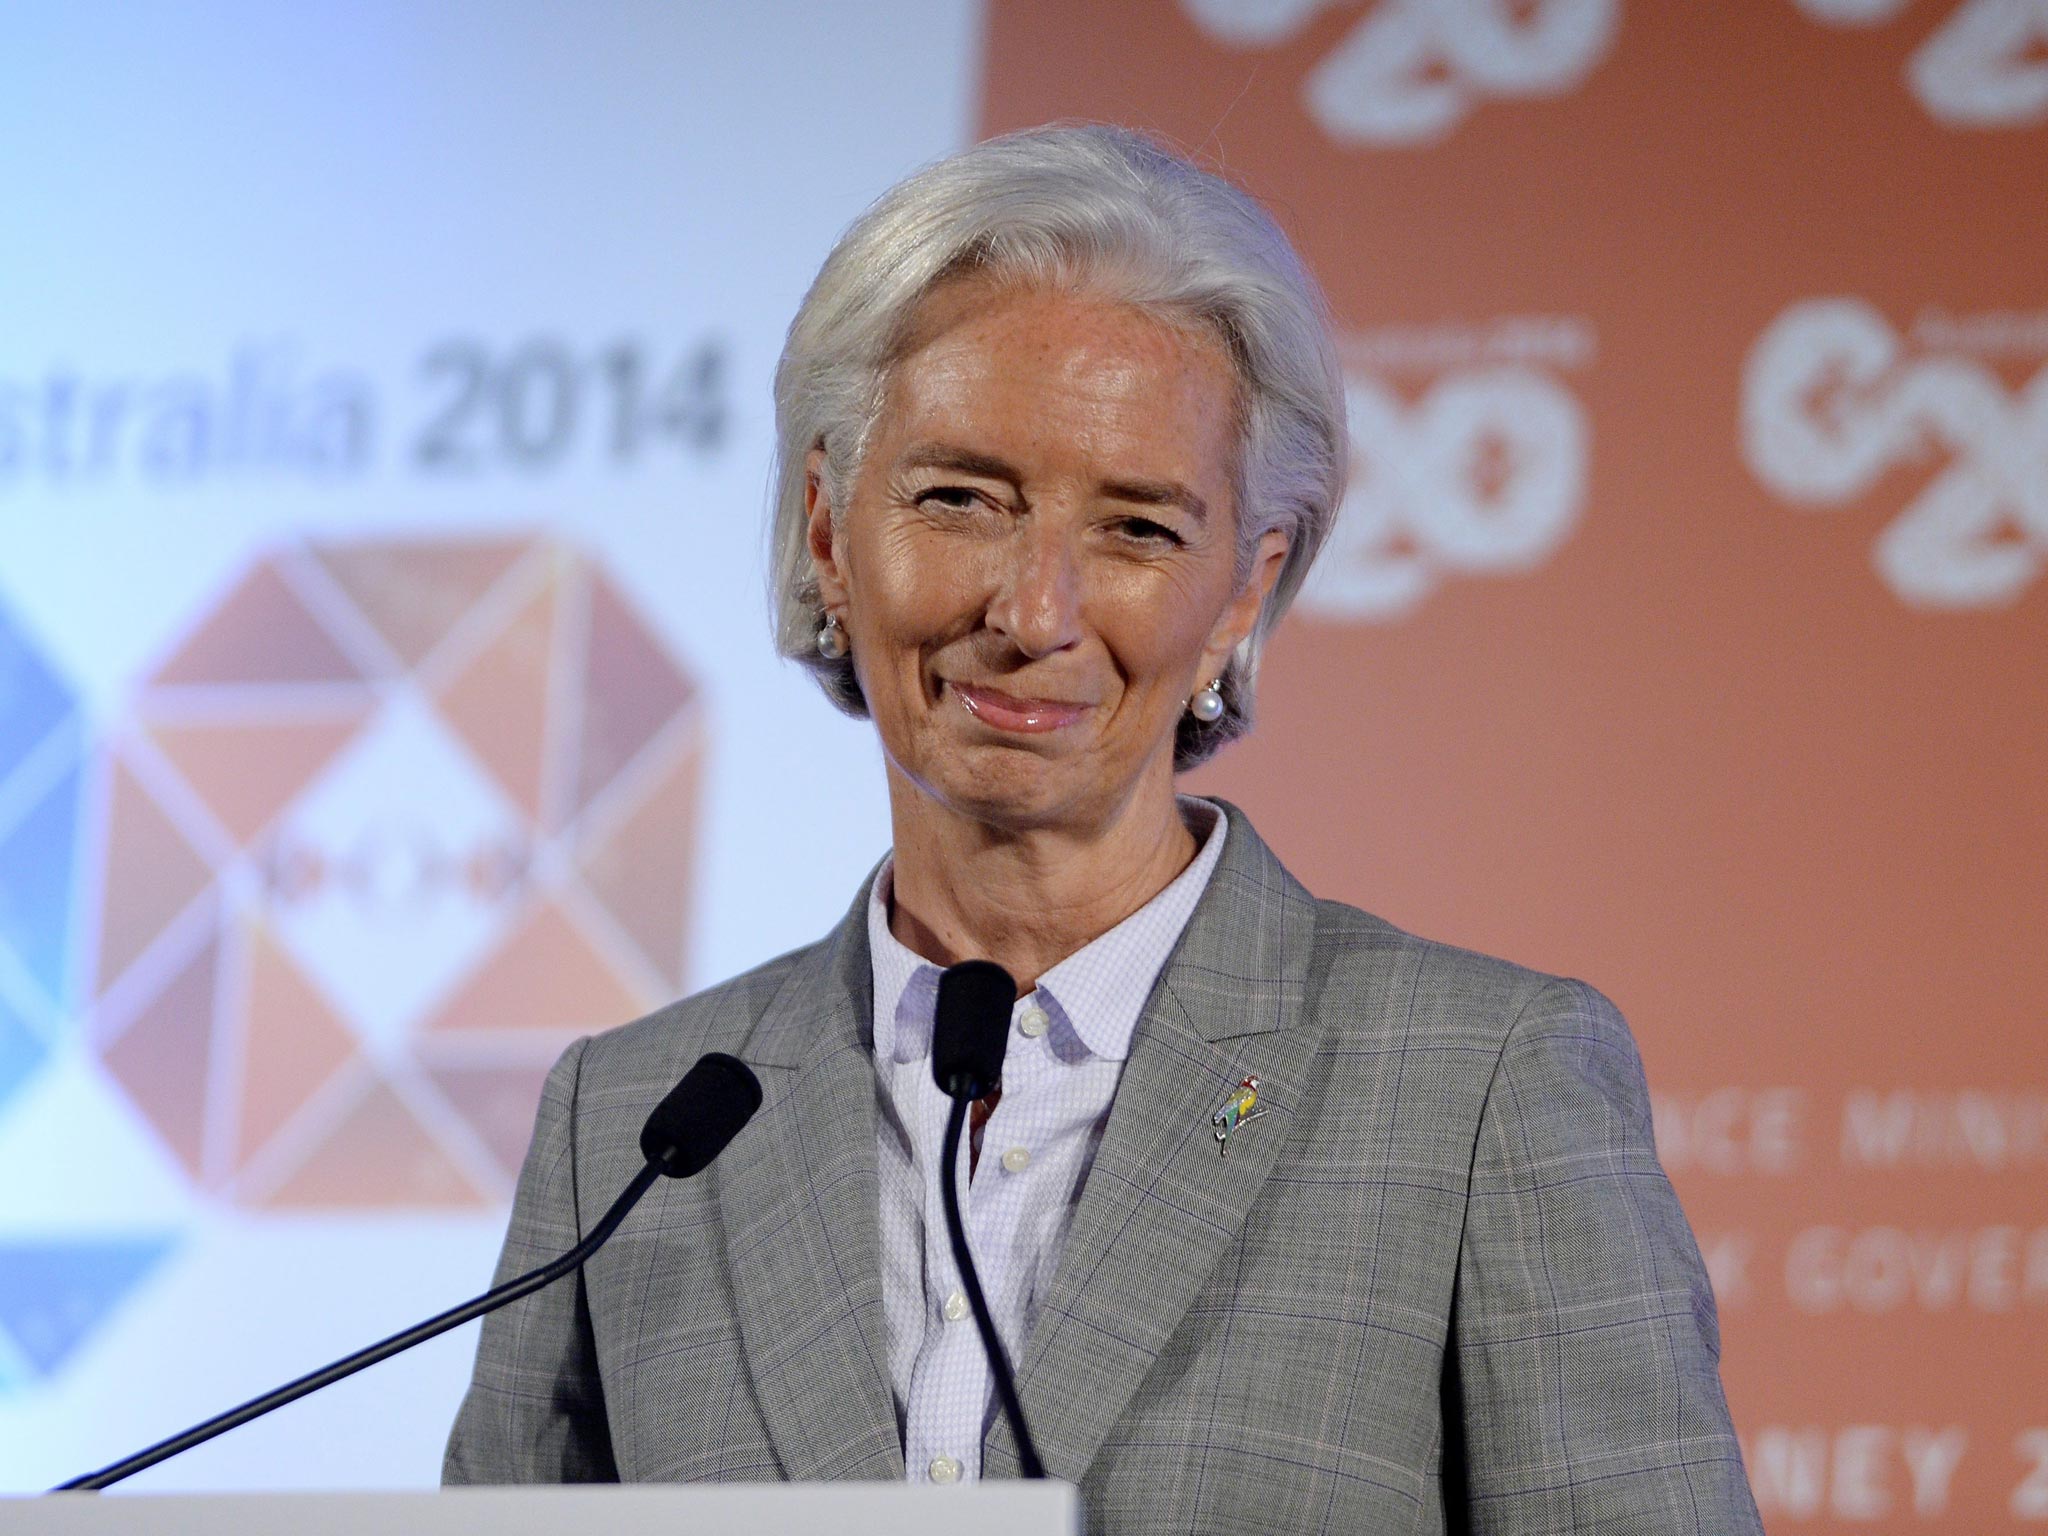 The pledge has been welcomed by managing director of the International Monetary Fund Christine Lagarde